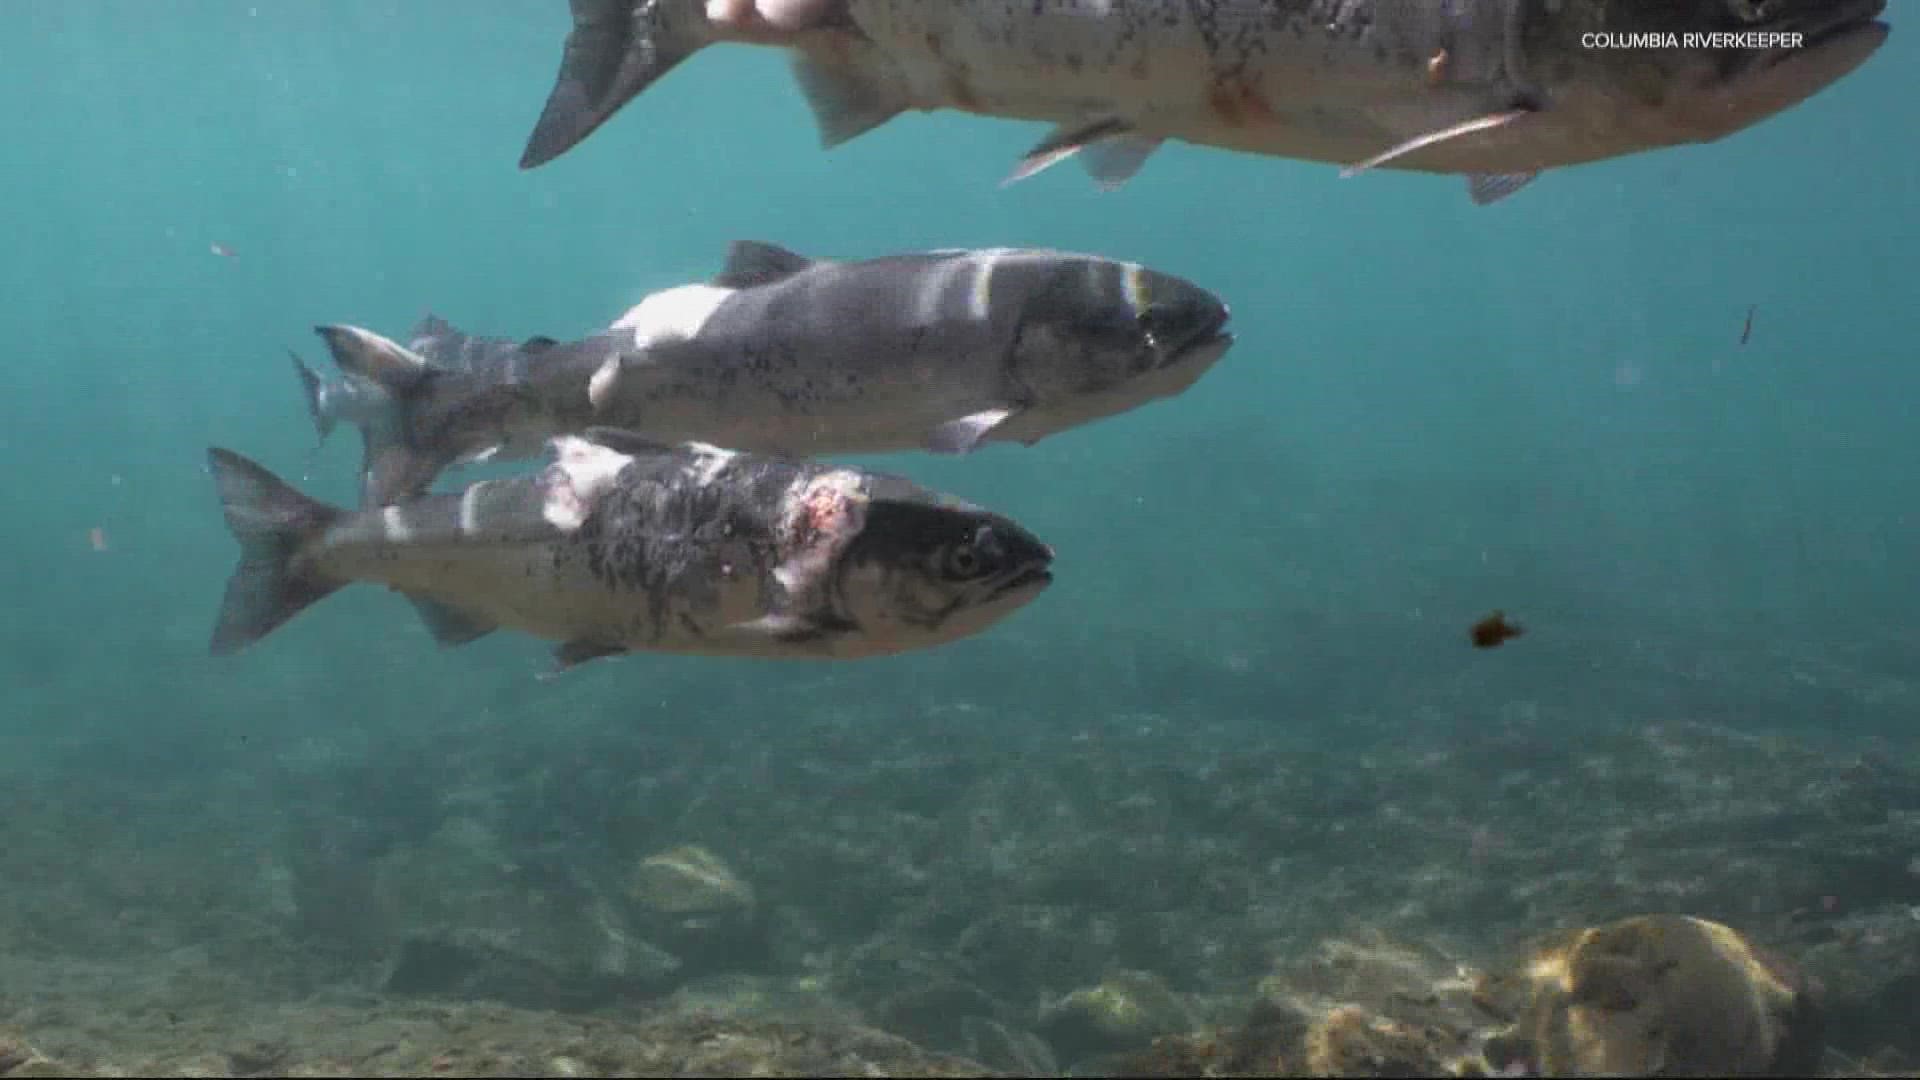 Starting this spring, dams must limit hot water pollution caused by the Lower Snake River Dams. Those in favor of the change said it's a step to help salmon survive.